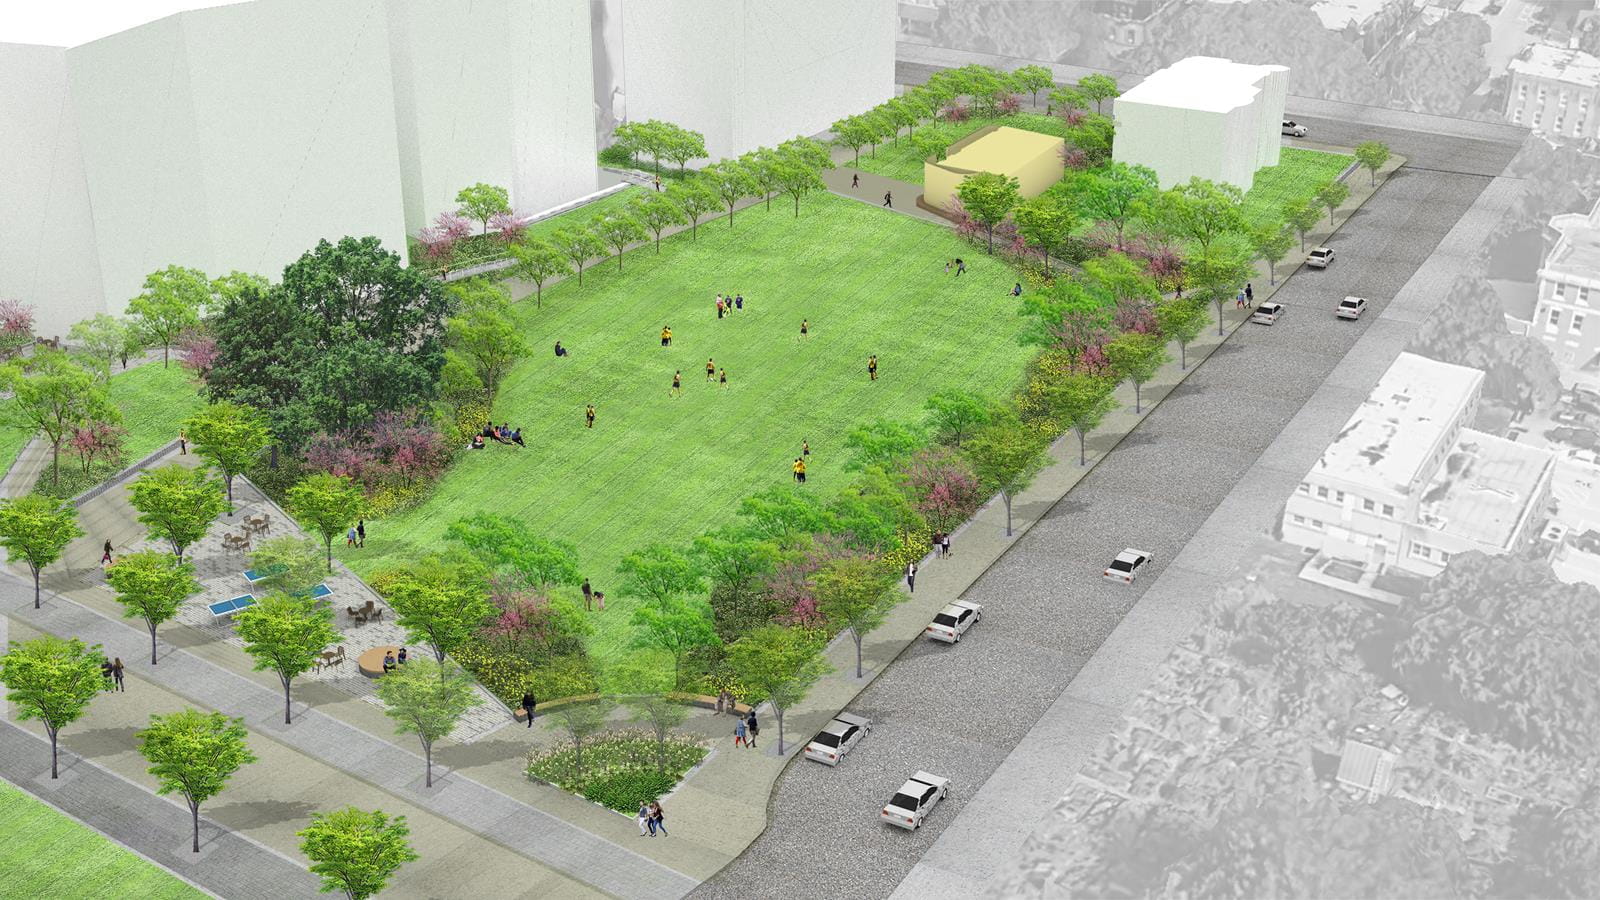 A conceptual rendering of the proposed green space. Image courtesy of Andropogon Associates.